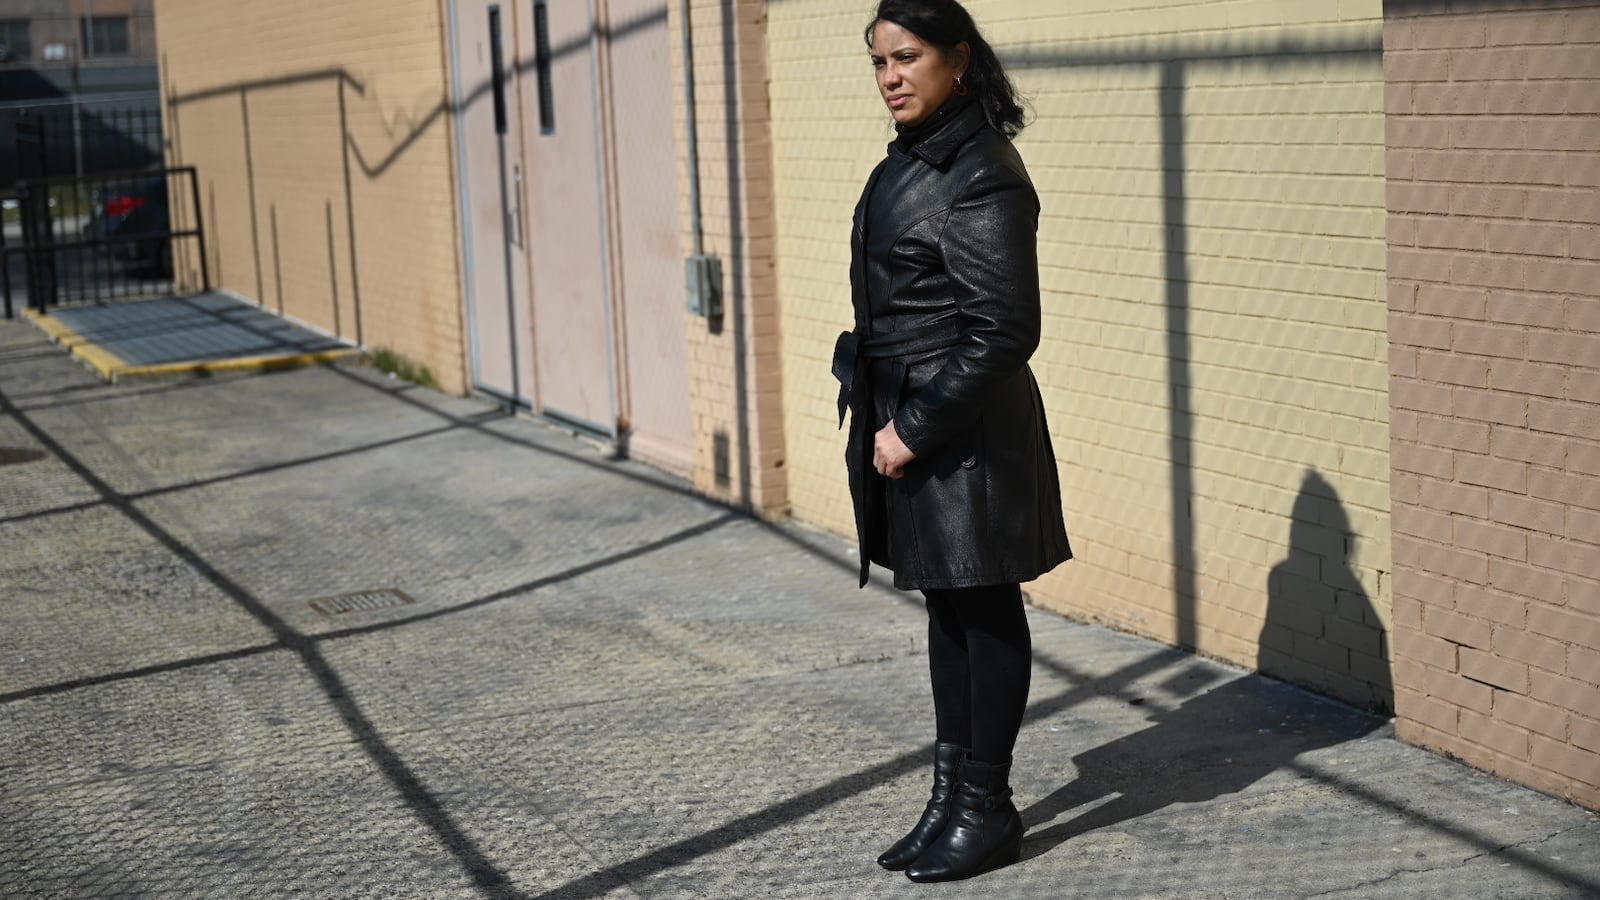 Yesenia Peralta is the principal of the Brooklyn Democracy Academy where Dez Ann Romain, the former principal, died from COVID in the early months of the pandemic.